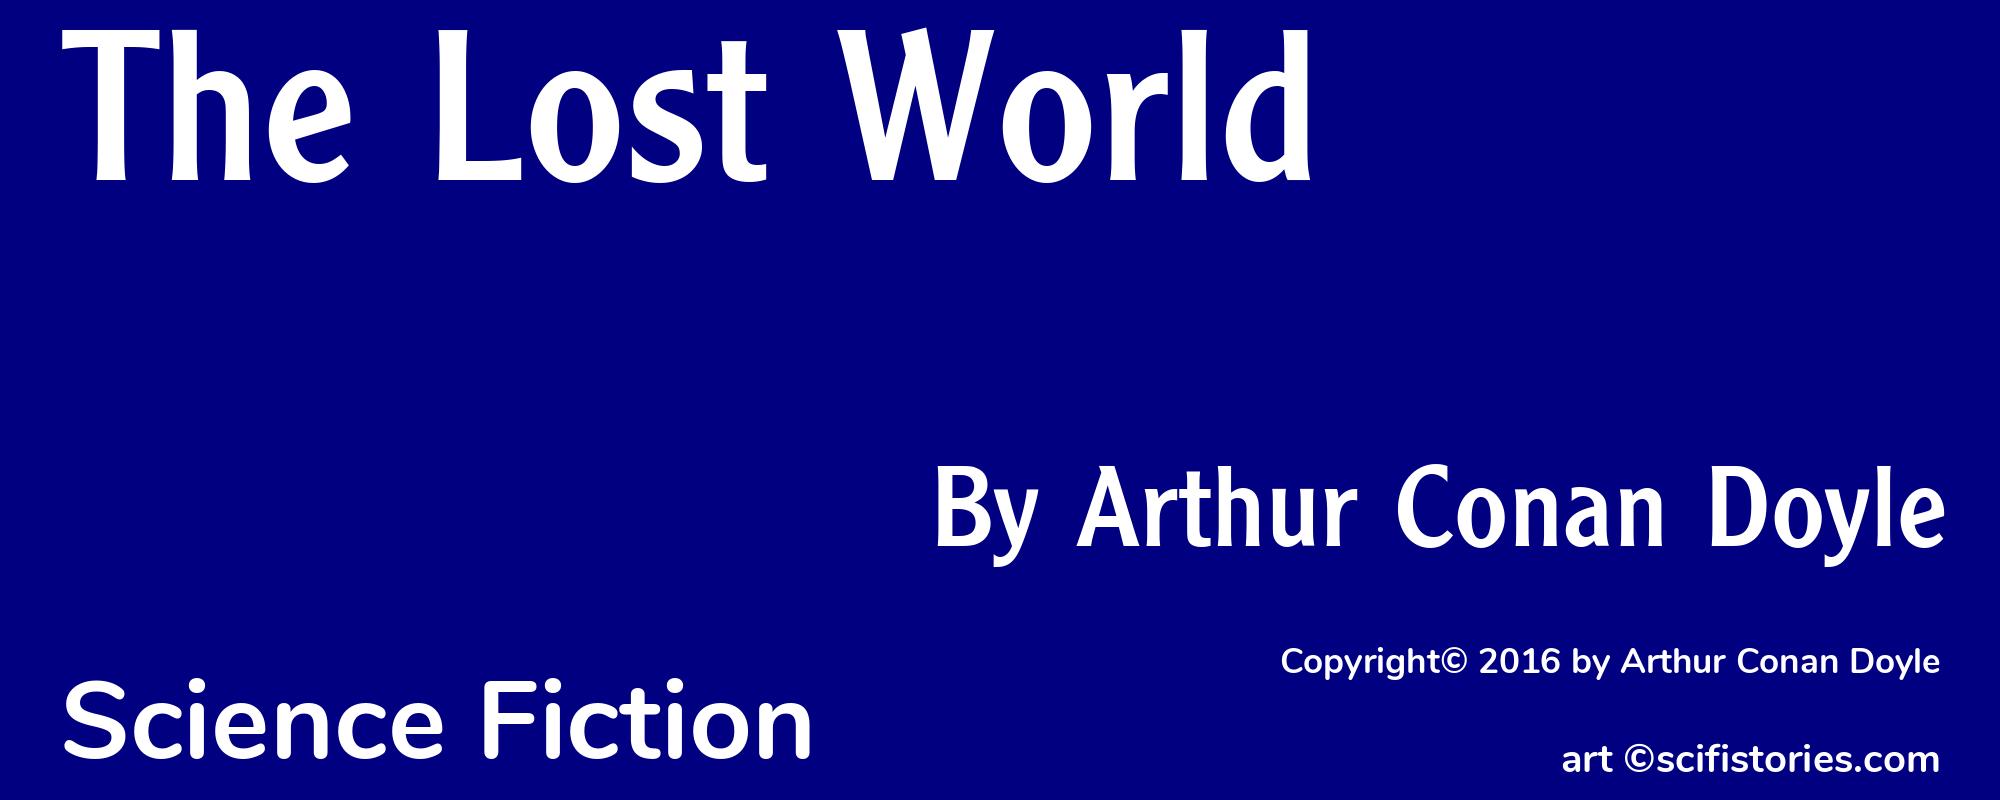 The Lost World - Cover